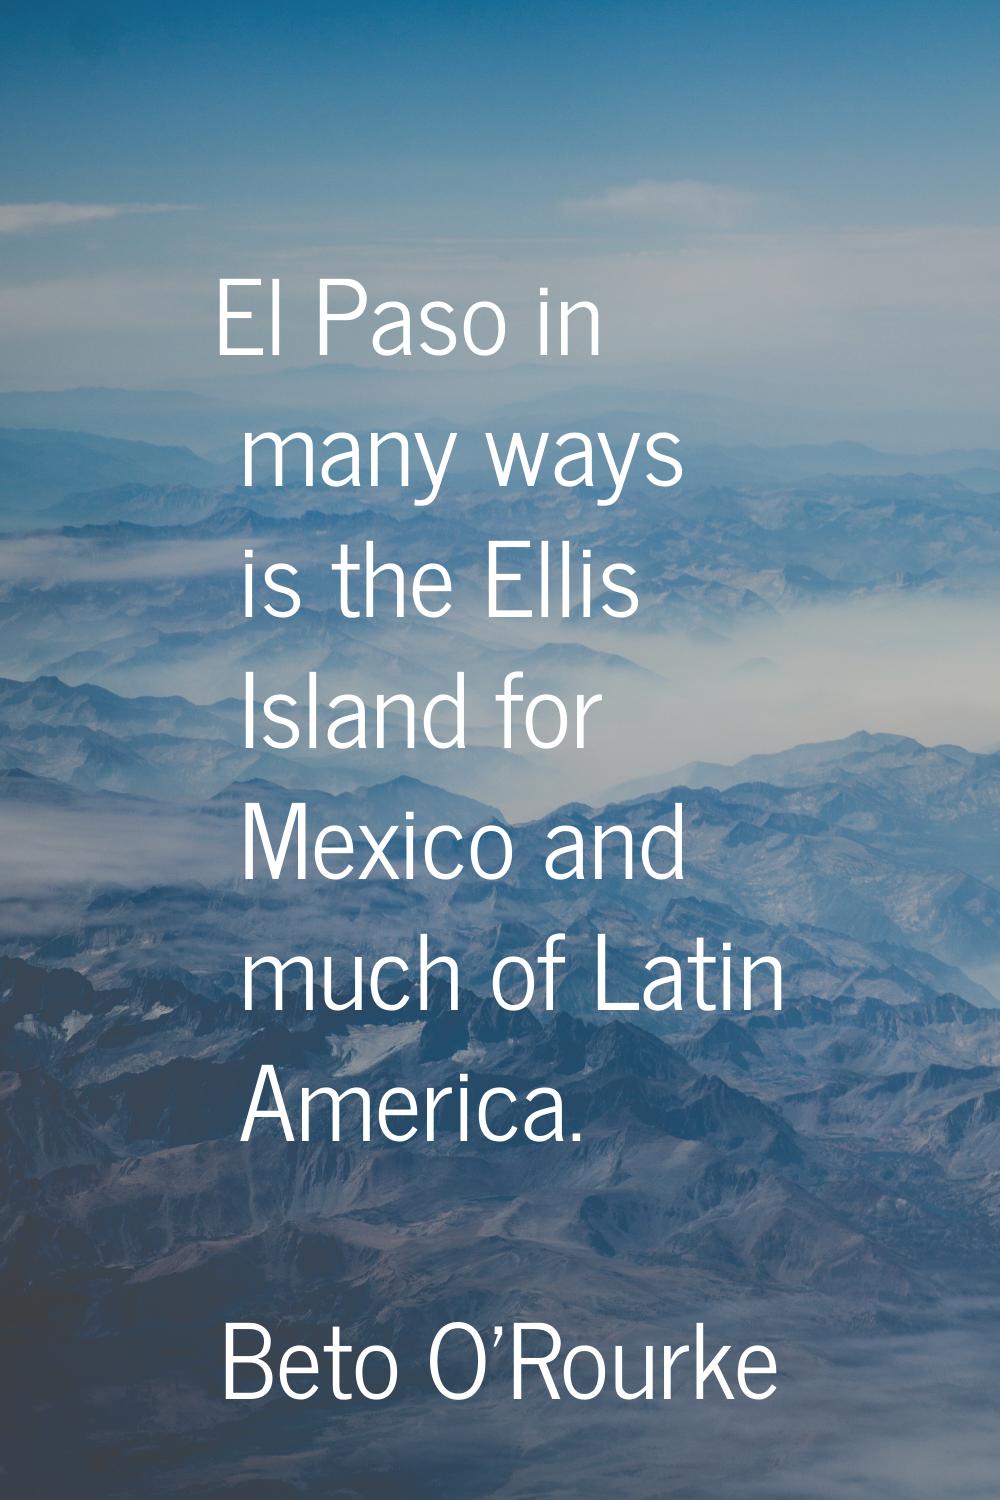 El Paso in many ways is the Ellis Island for Mexico and much of Latin America.